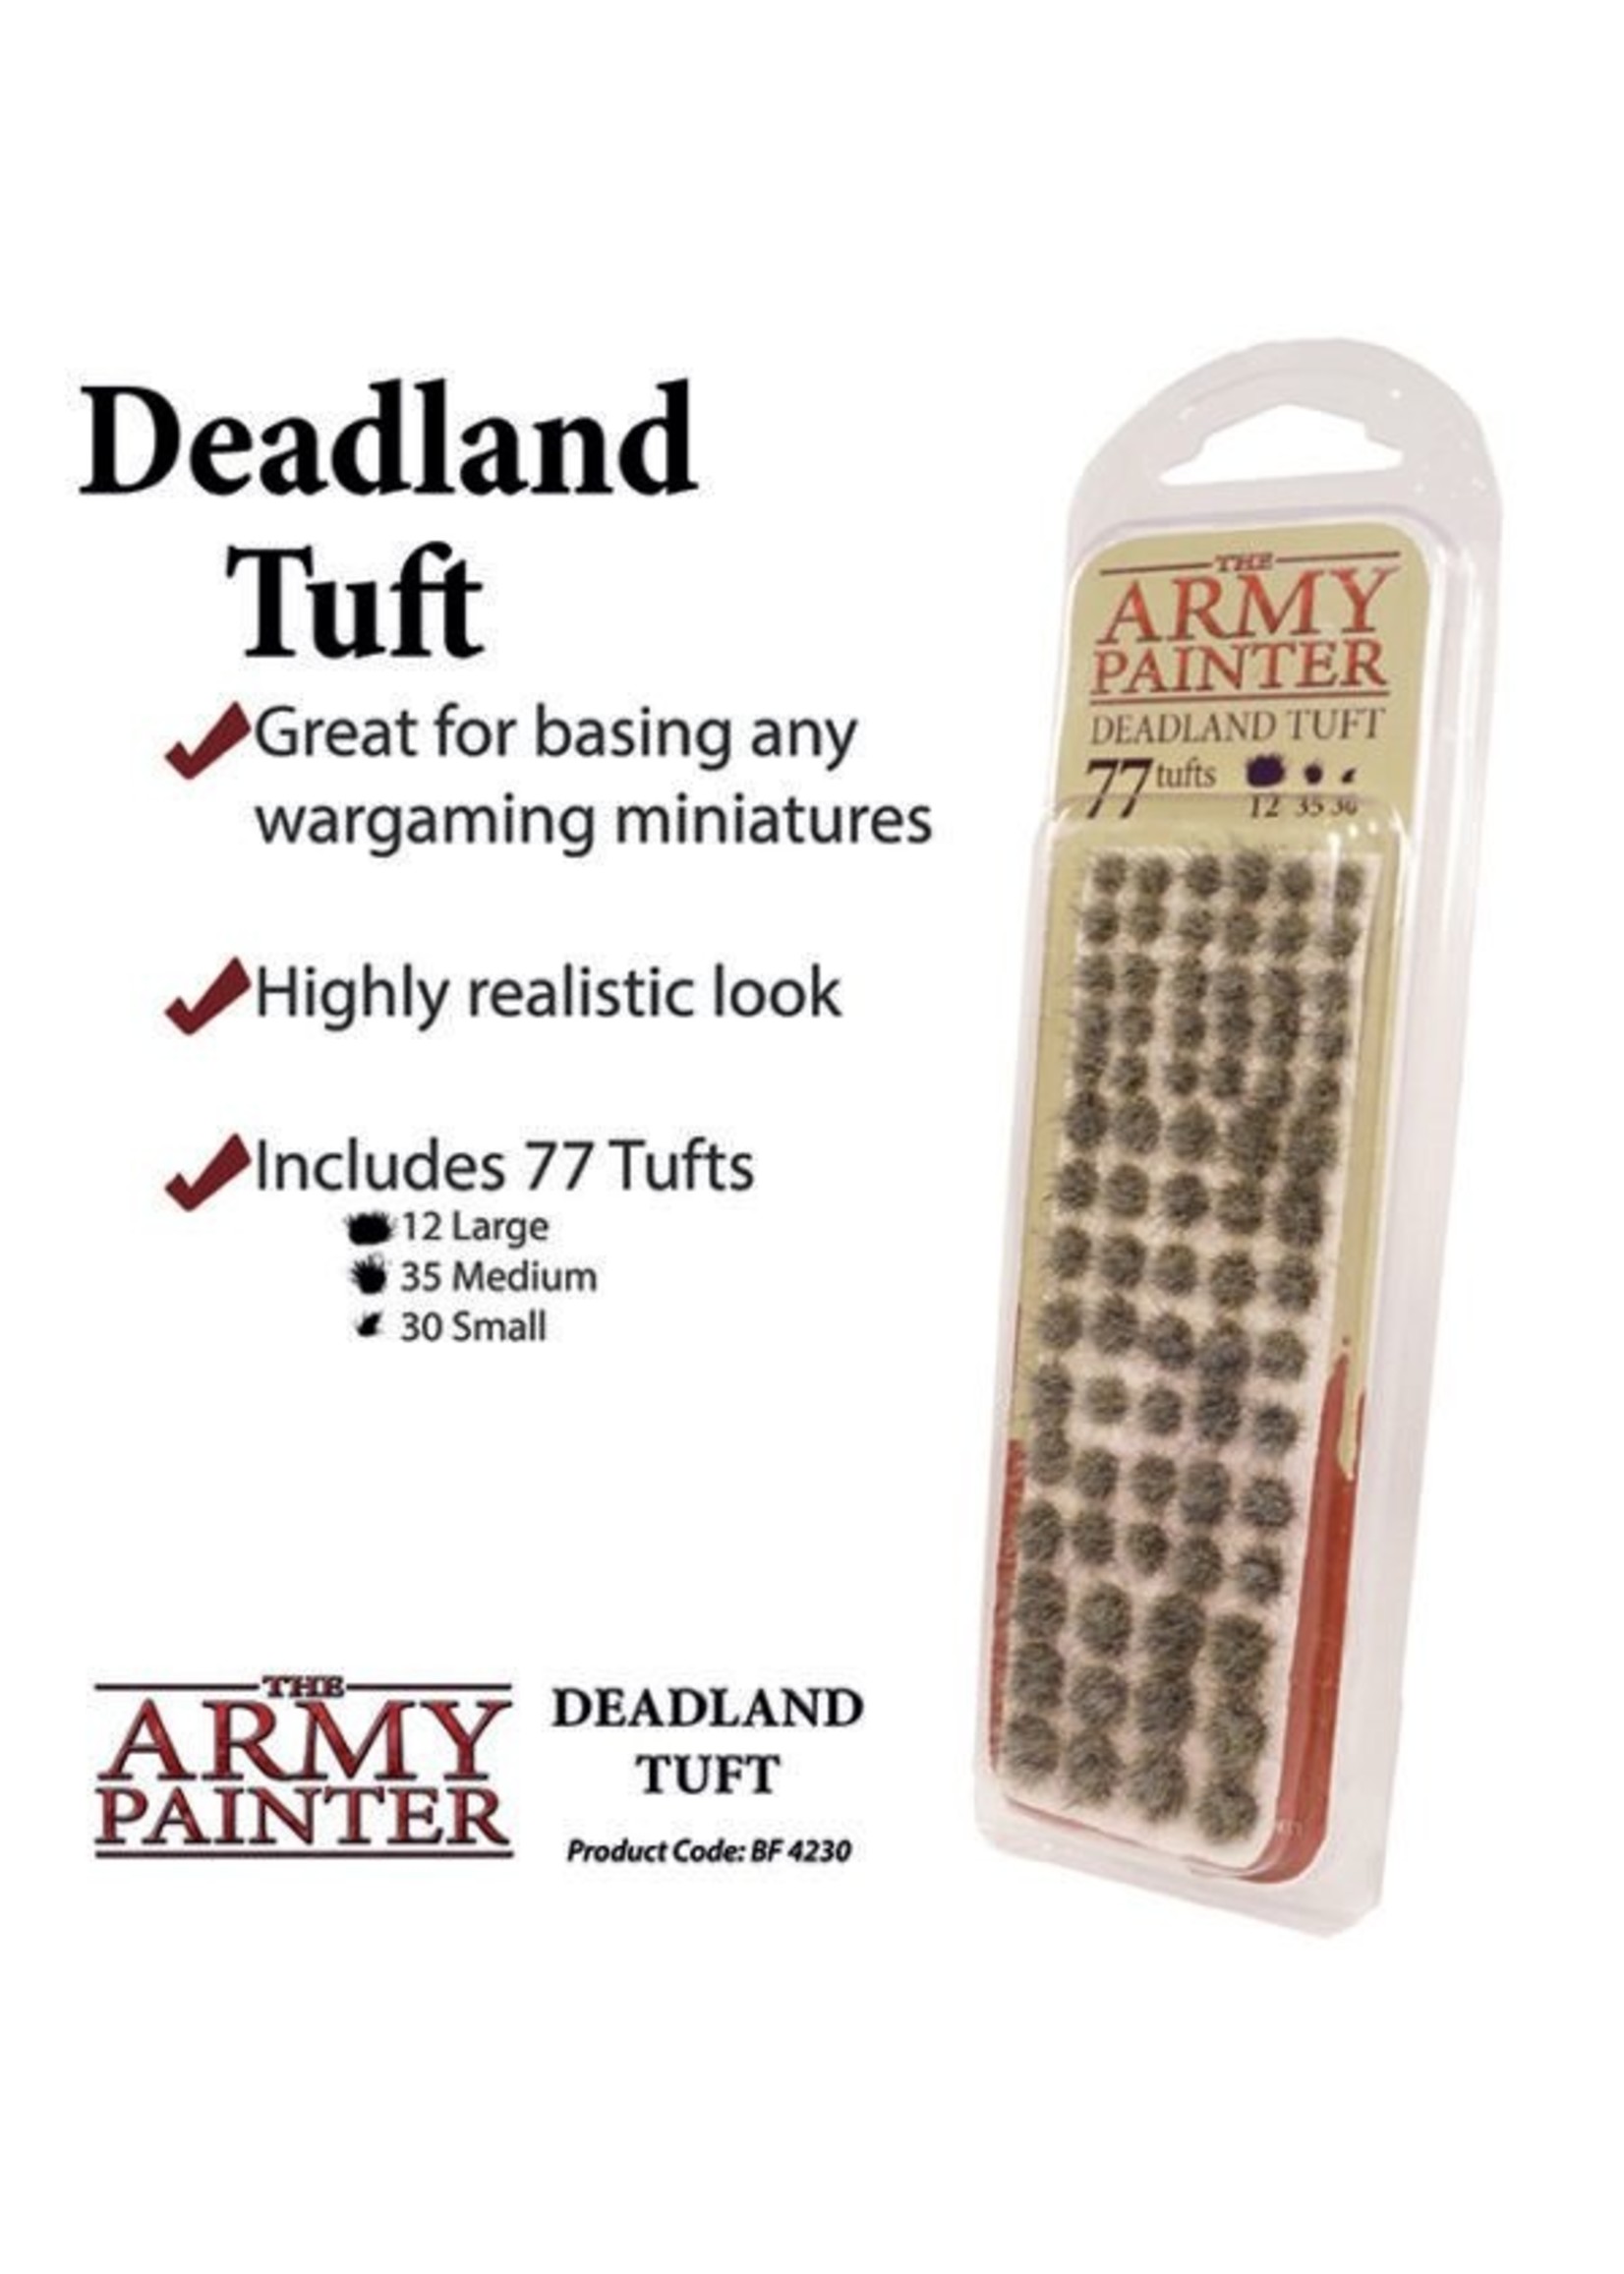 The Army Painter Tufts: Deadland